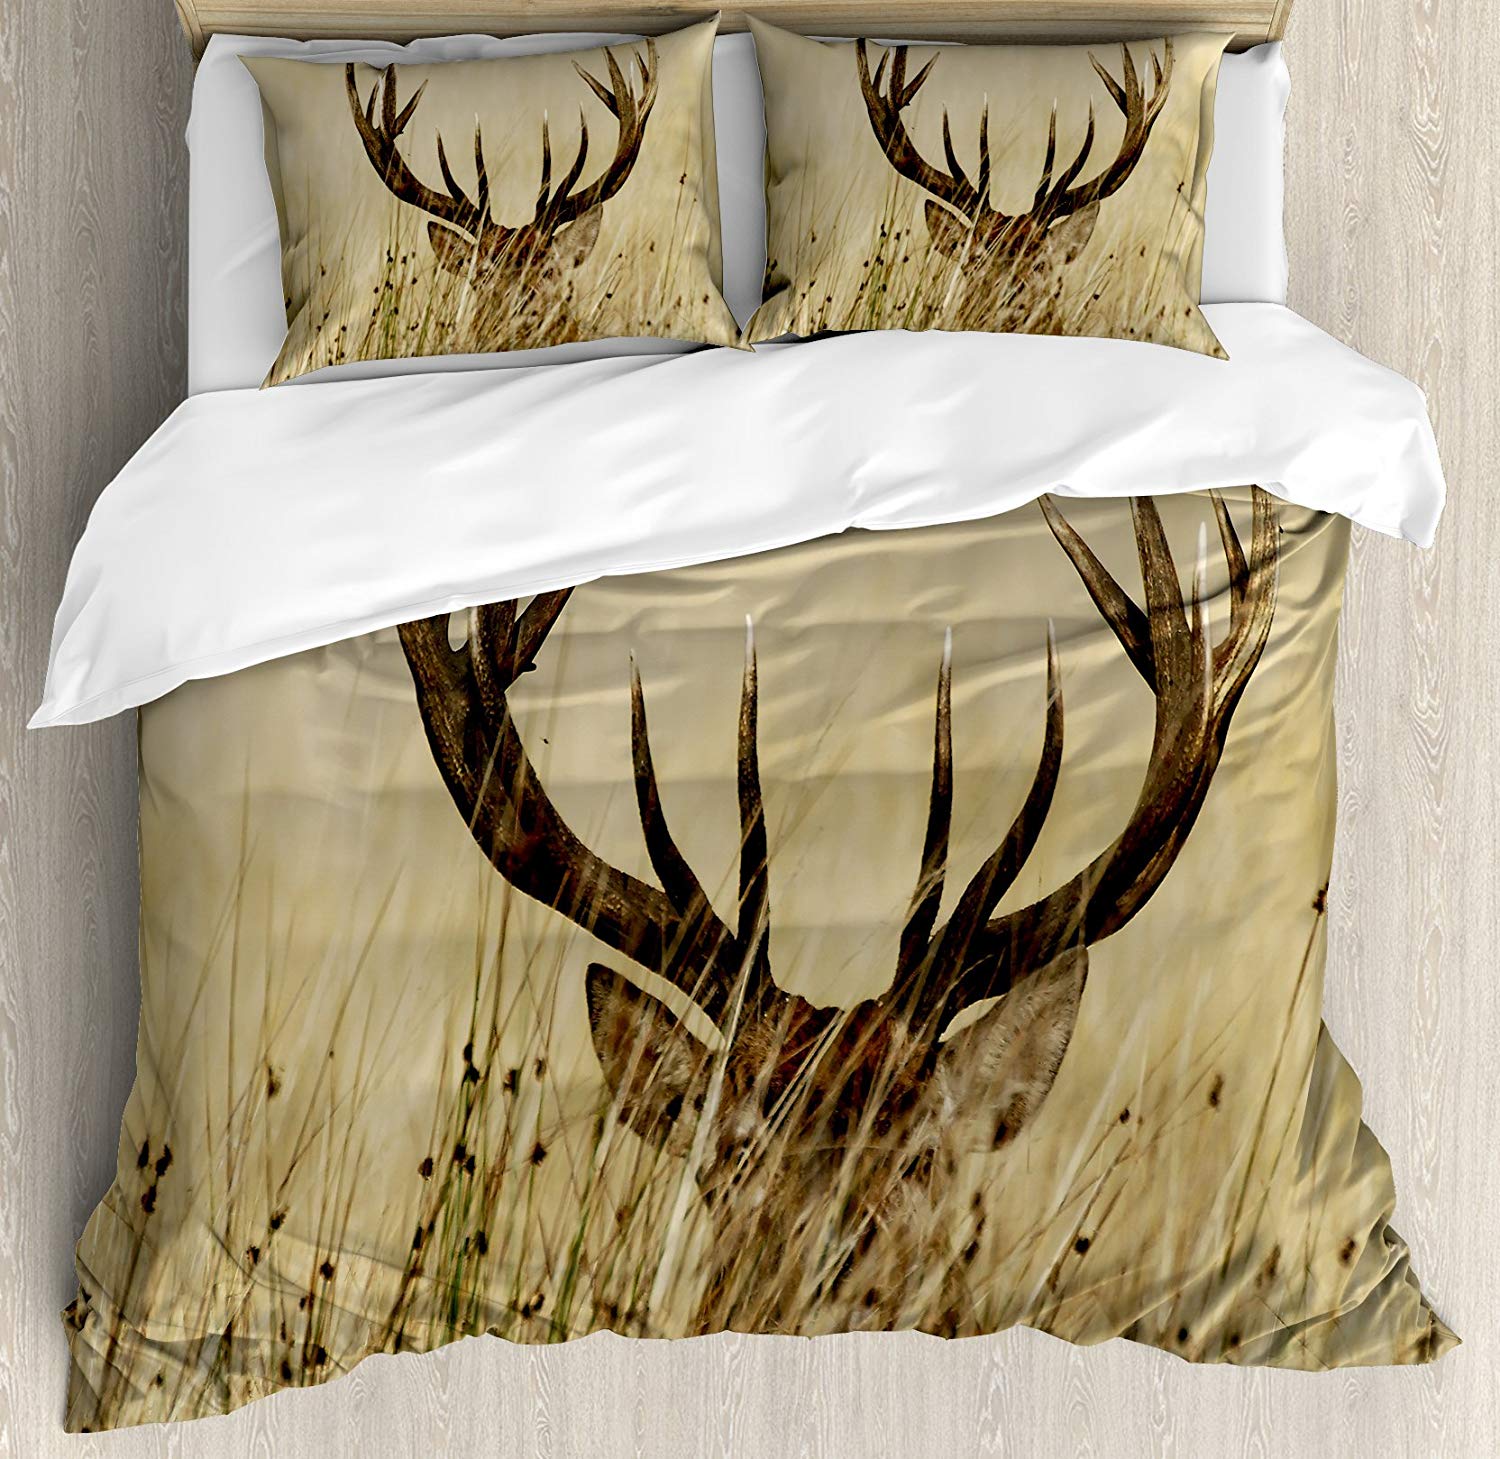 Antler Decor Queen Size Duvet Cover Set by Ambesonne